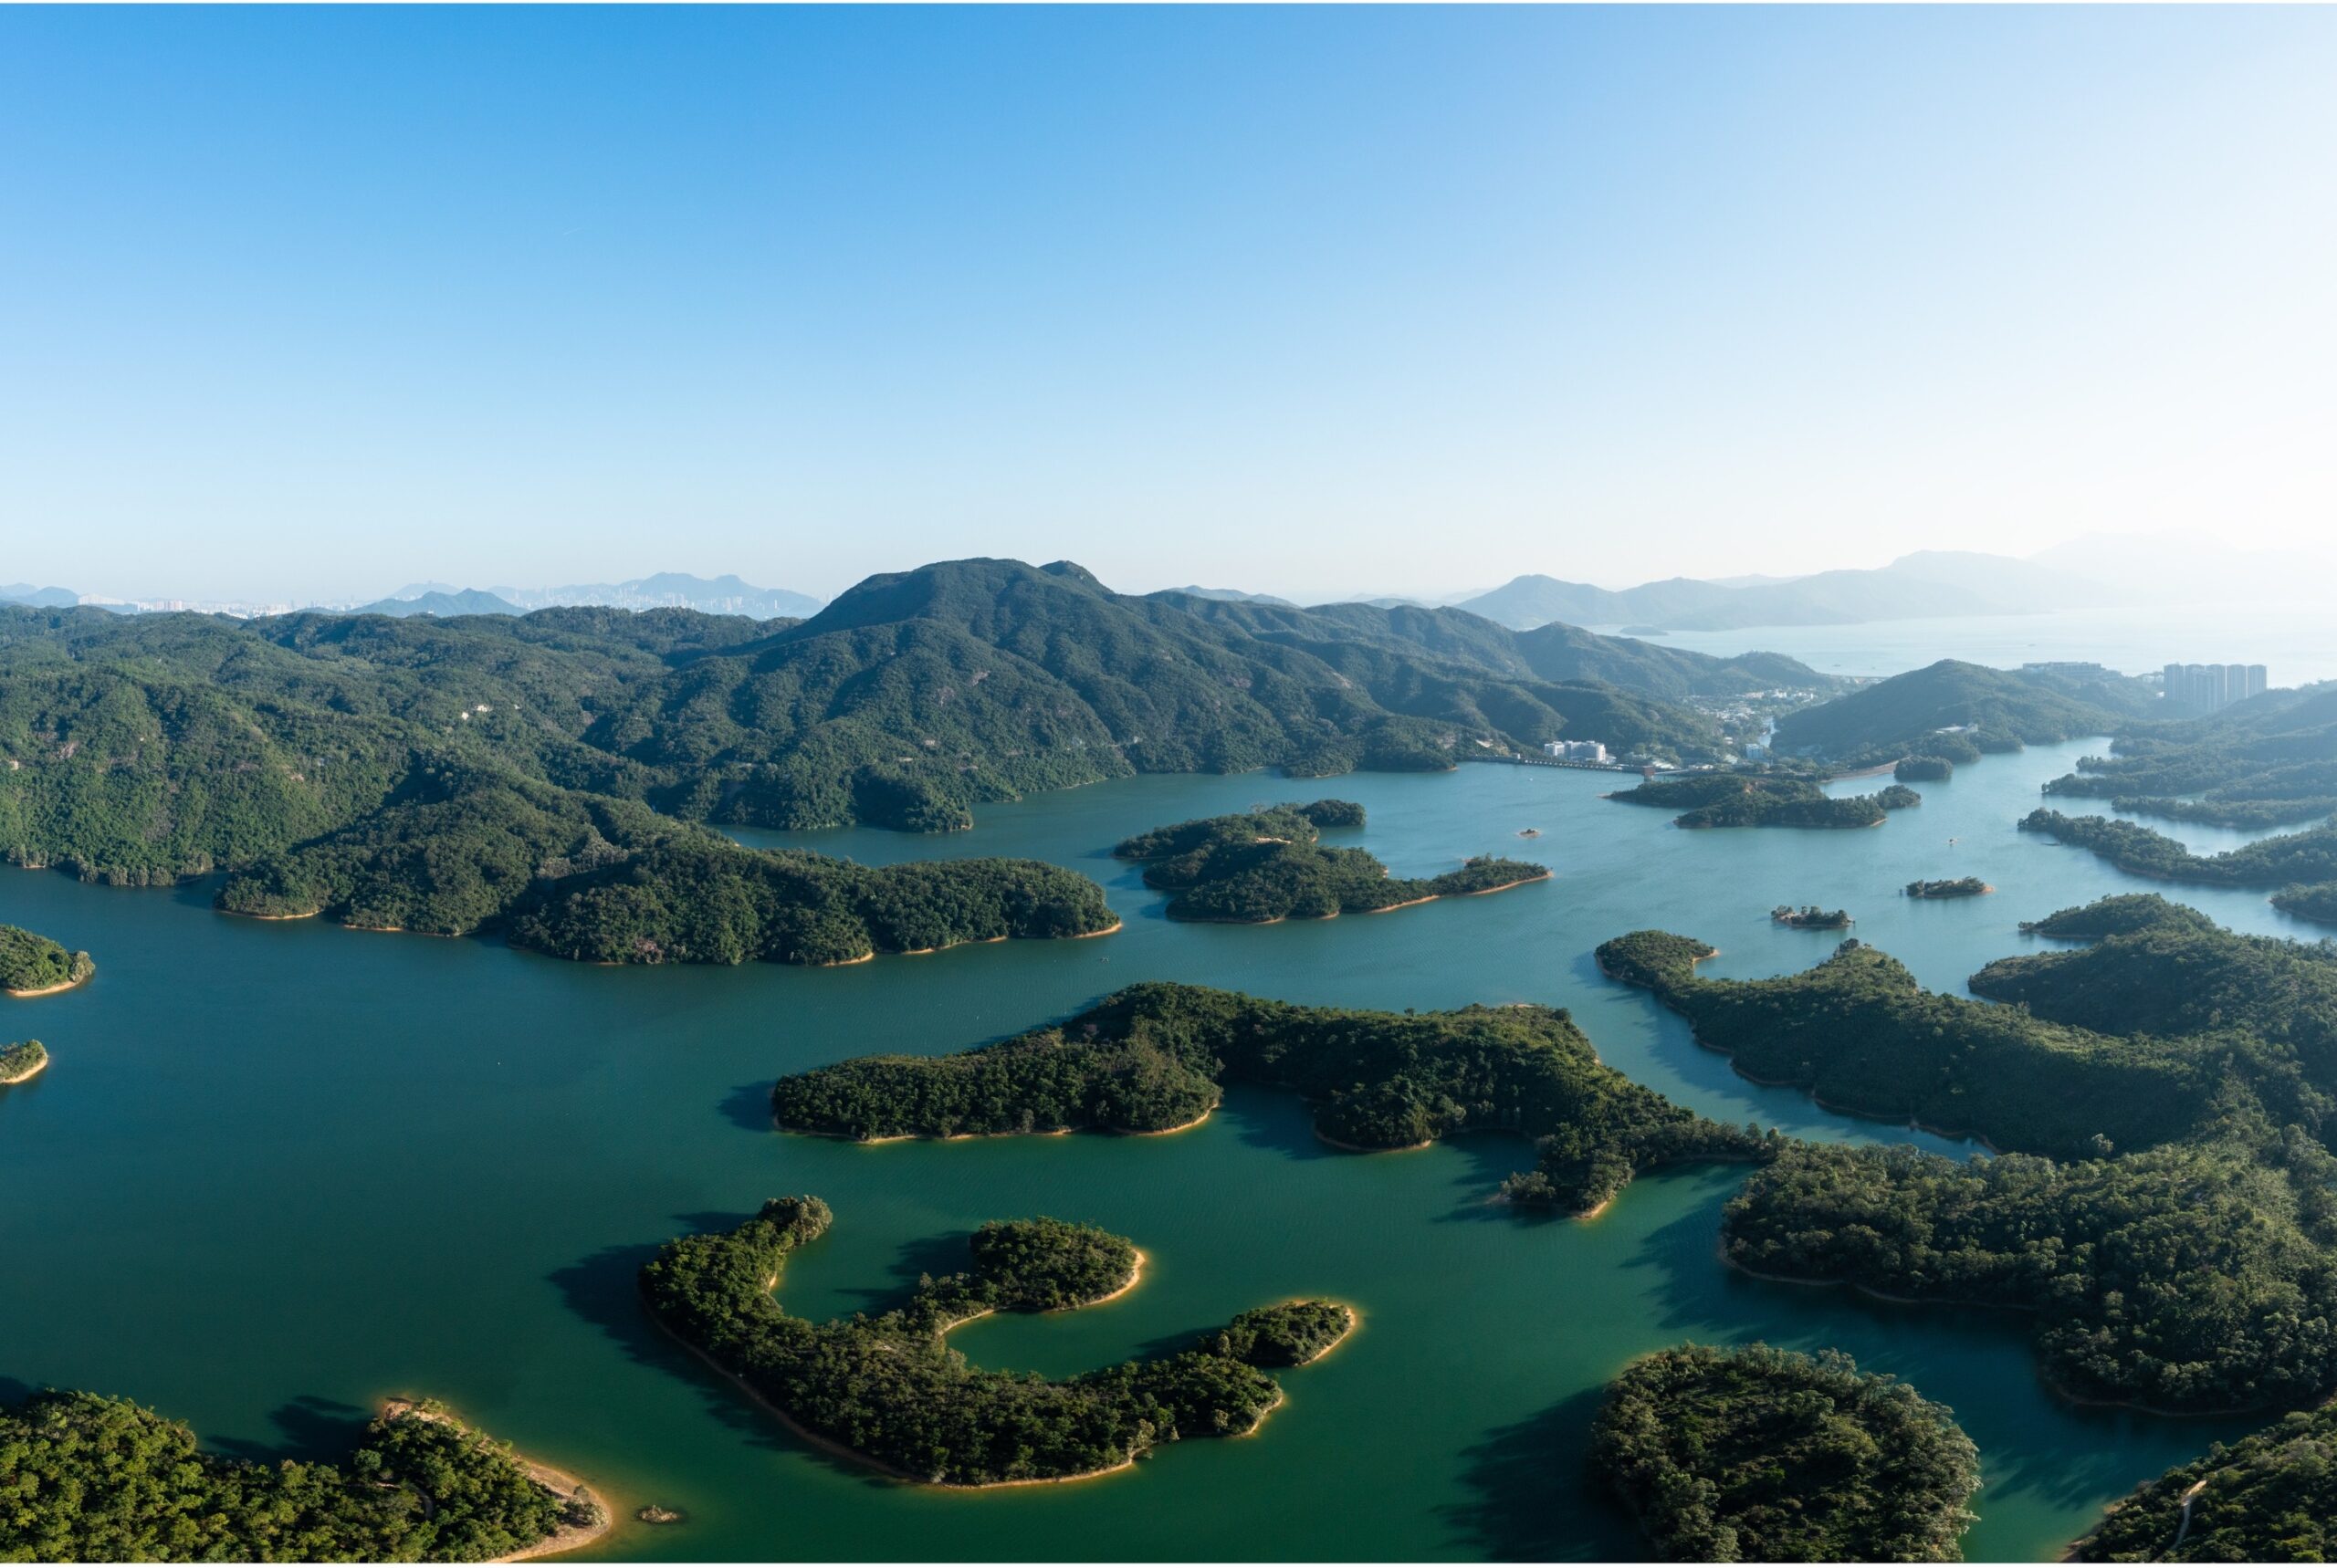 An overhead view of the islands within Tai Lam Chung Reservoir at Tai Lam Country Park. The islands are green with sandy shores and are of different shapes.